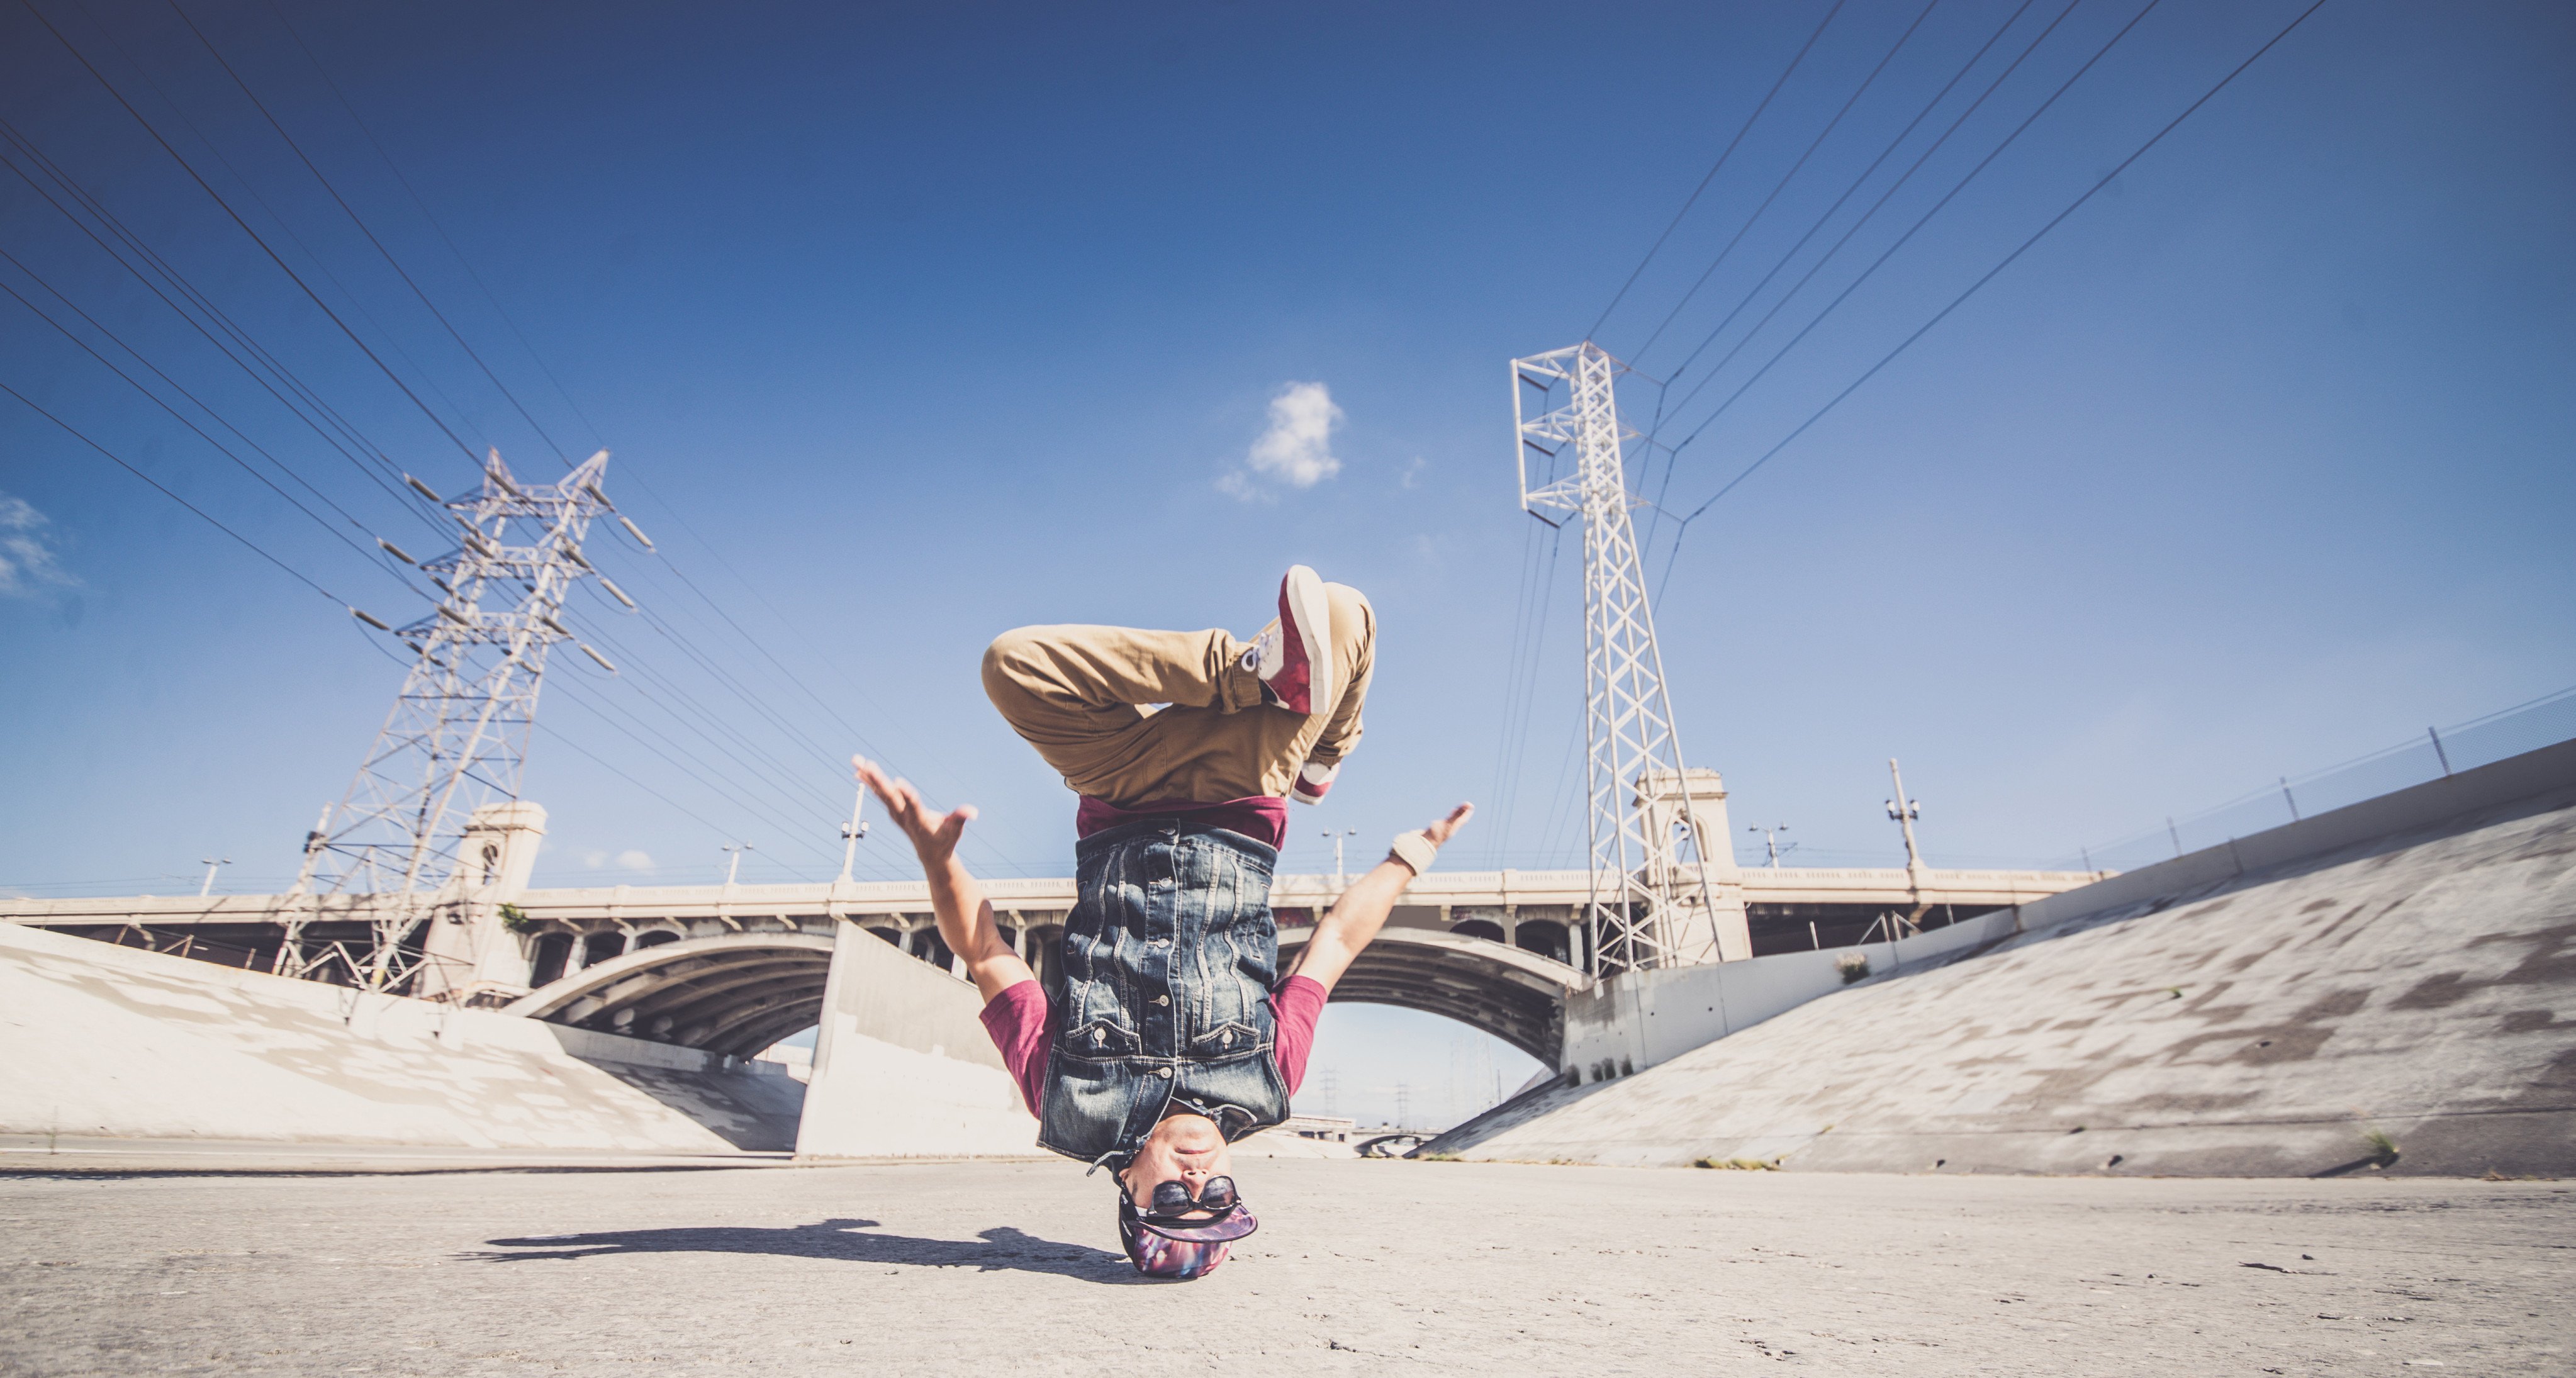 Many breakdancers are said to suffer from hair loss, due to headspinning. Photo: Shutterstock